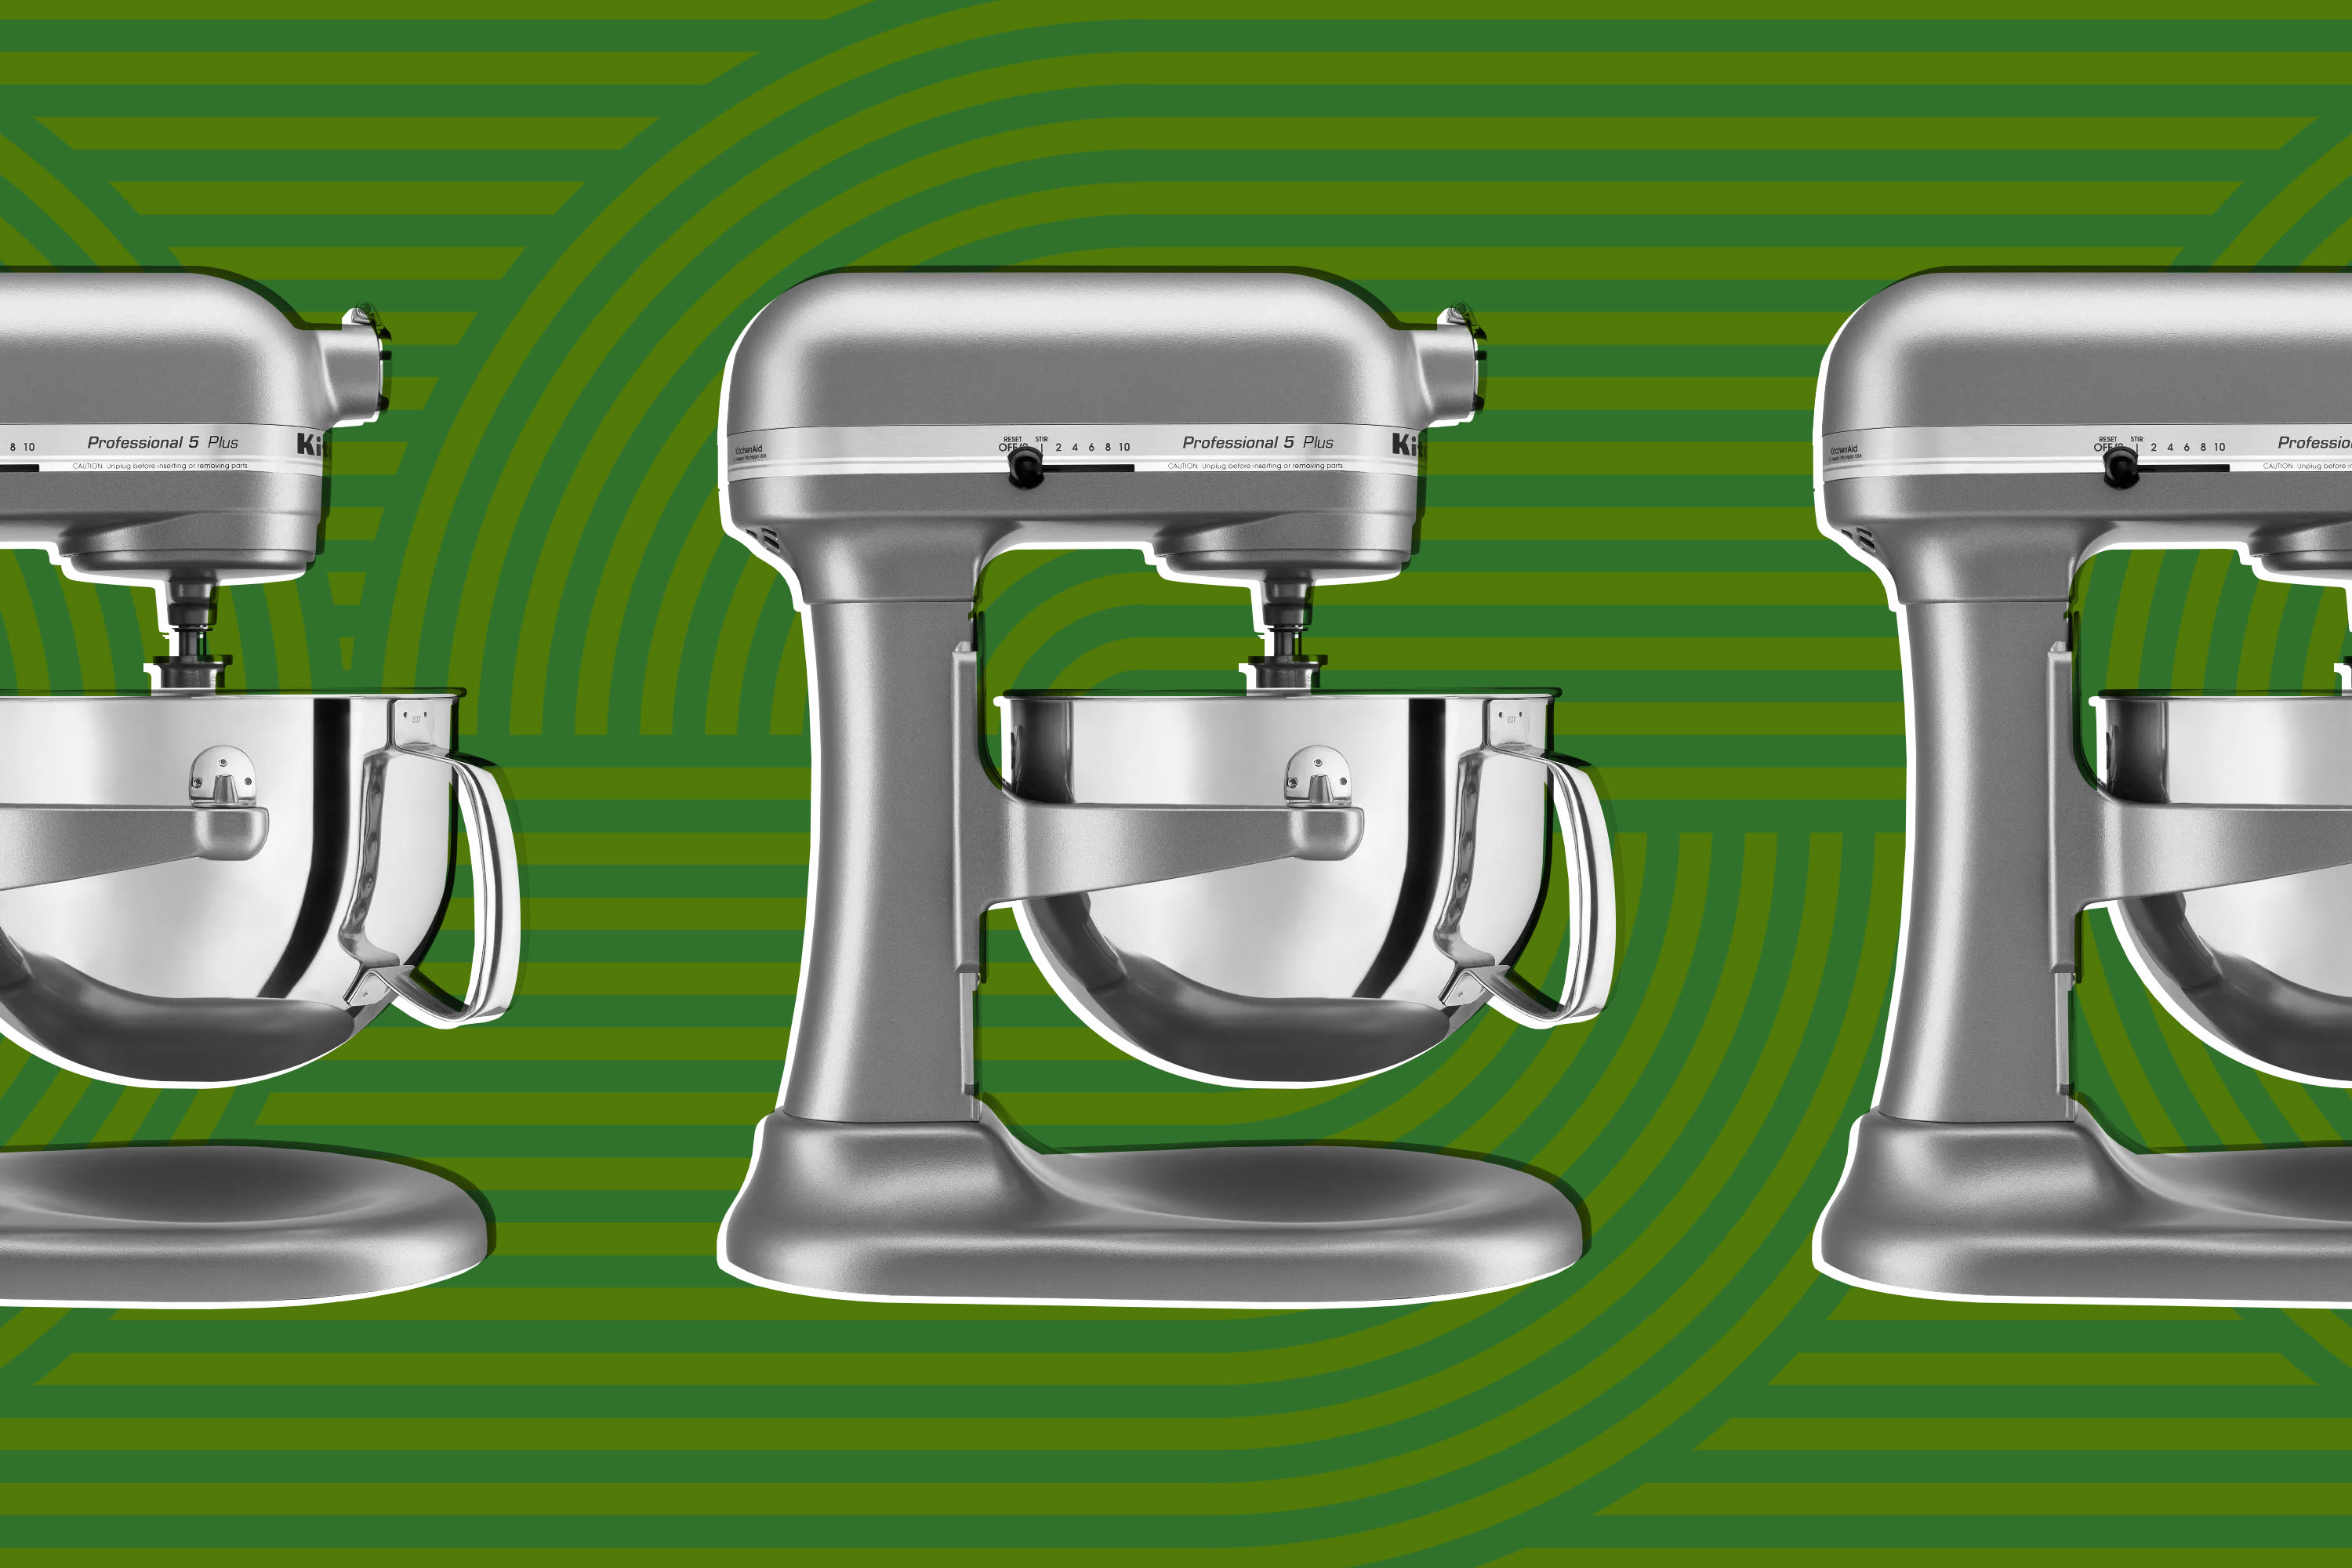 Motif of gray kitchen mixer against green background.